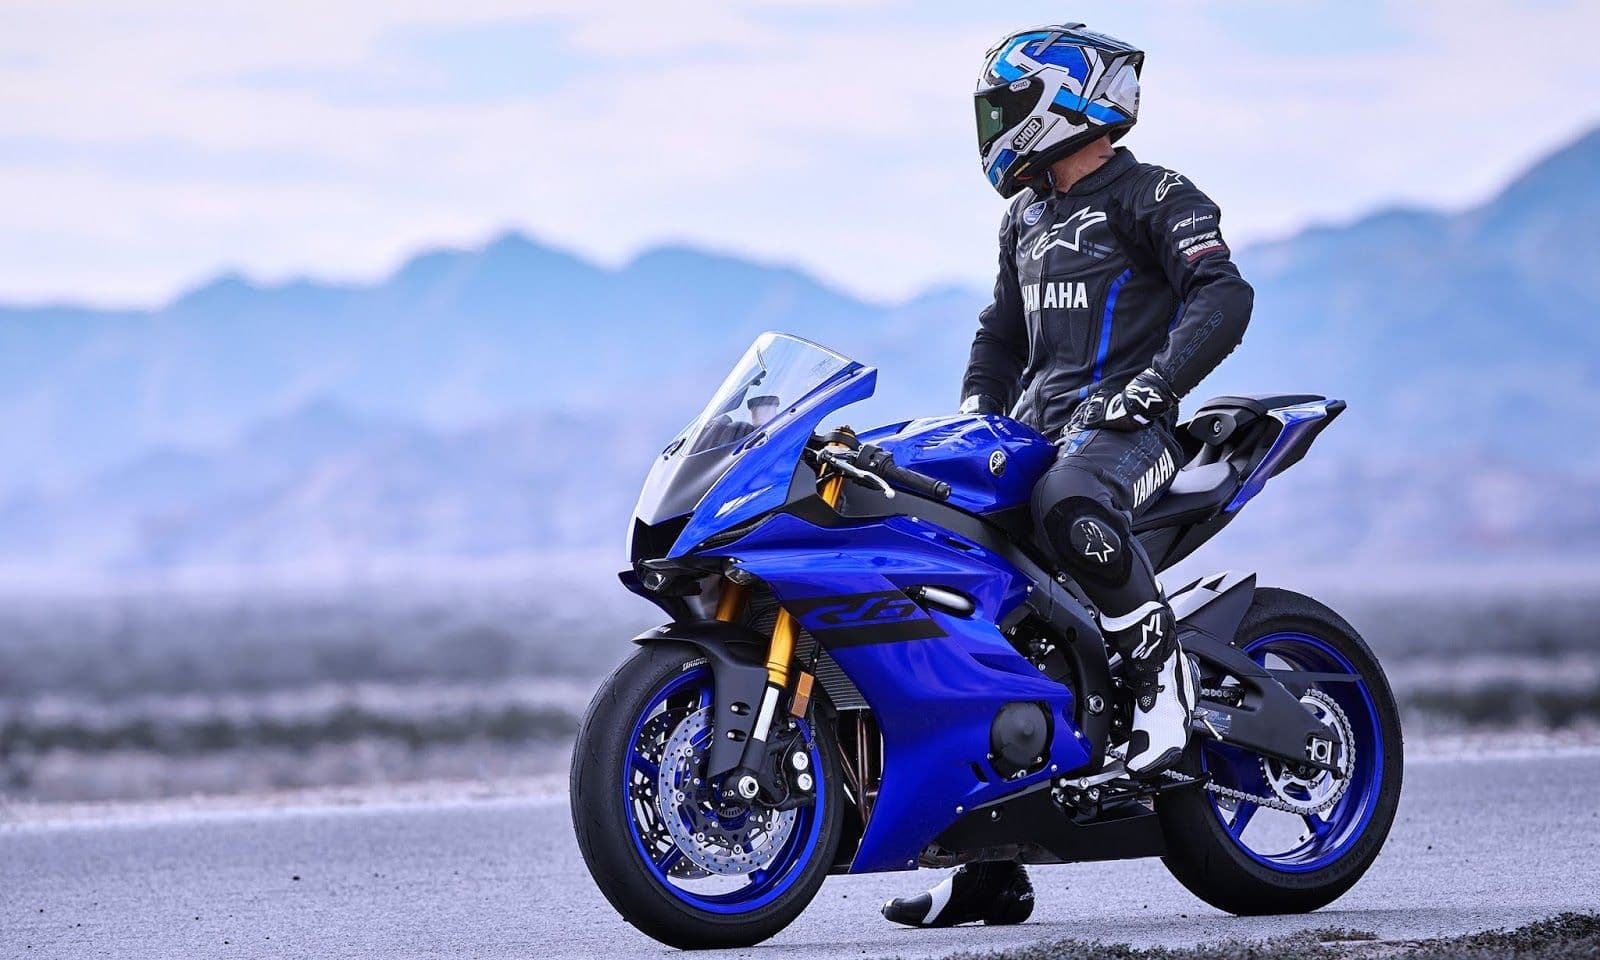 Yamaha Reportedly Working On A 250cc Inline-4 Motorcycle